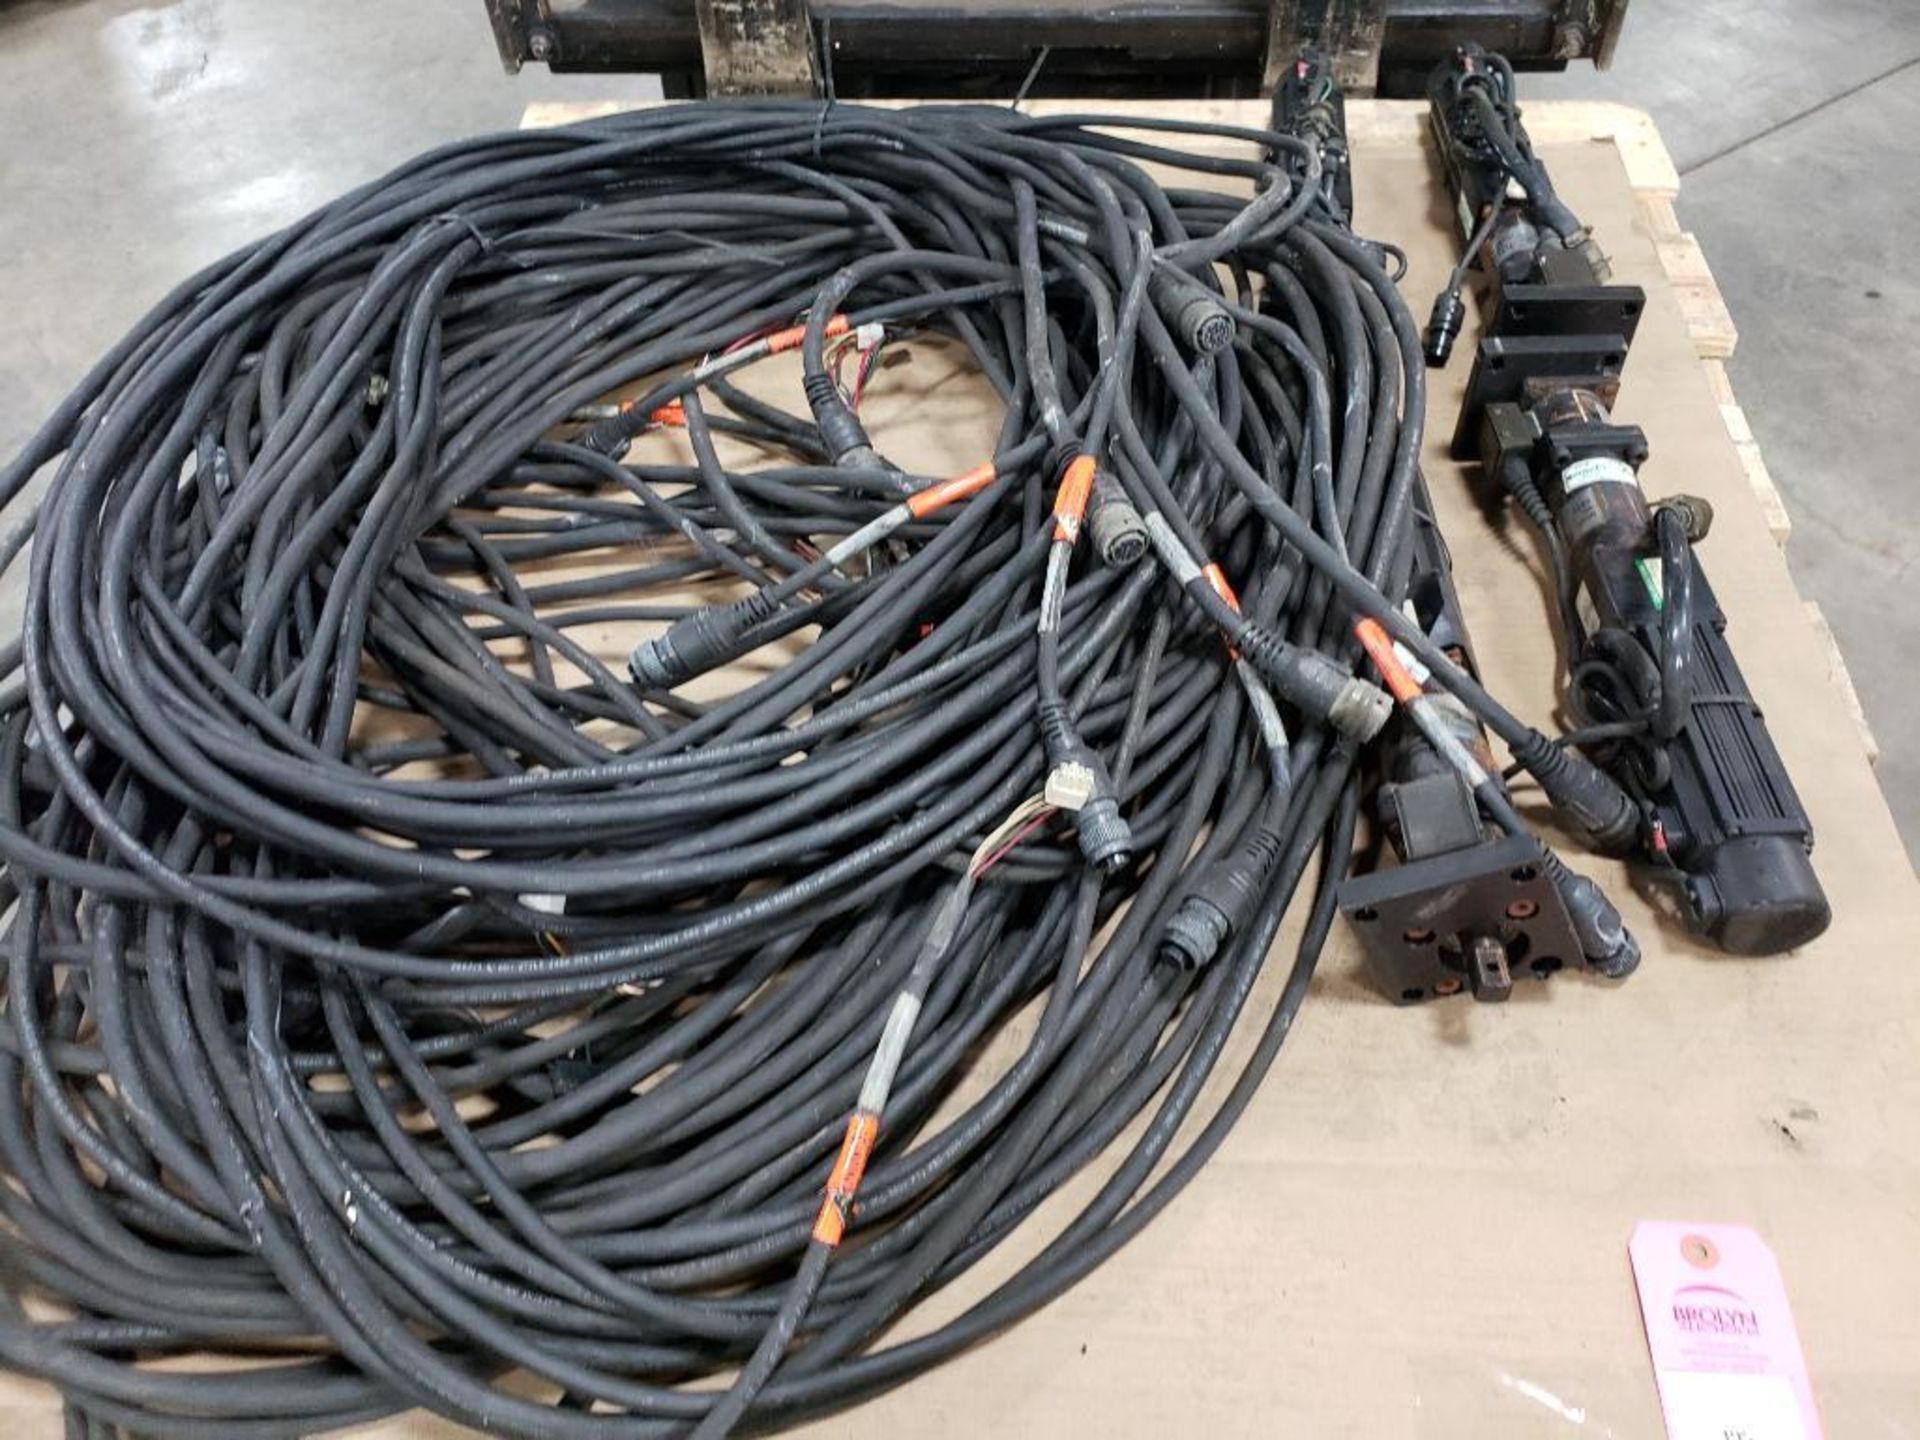 Qty 4 - FEC motorized nut runners NFT-202RM3-S and connection cords. 0.64Nm-Torque.